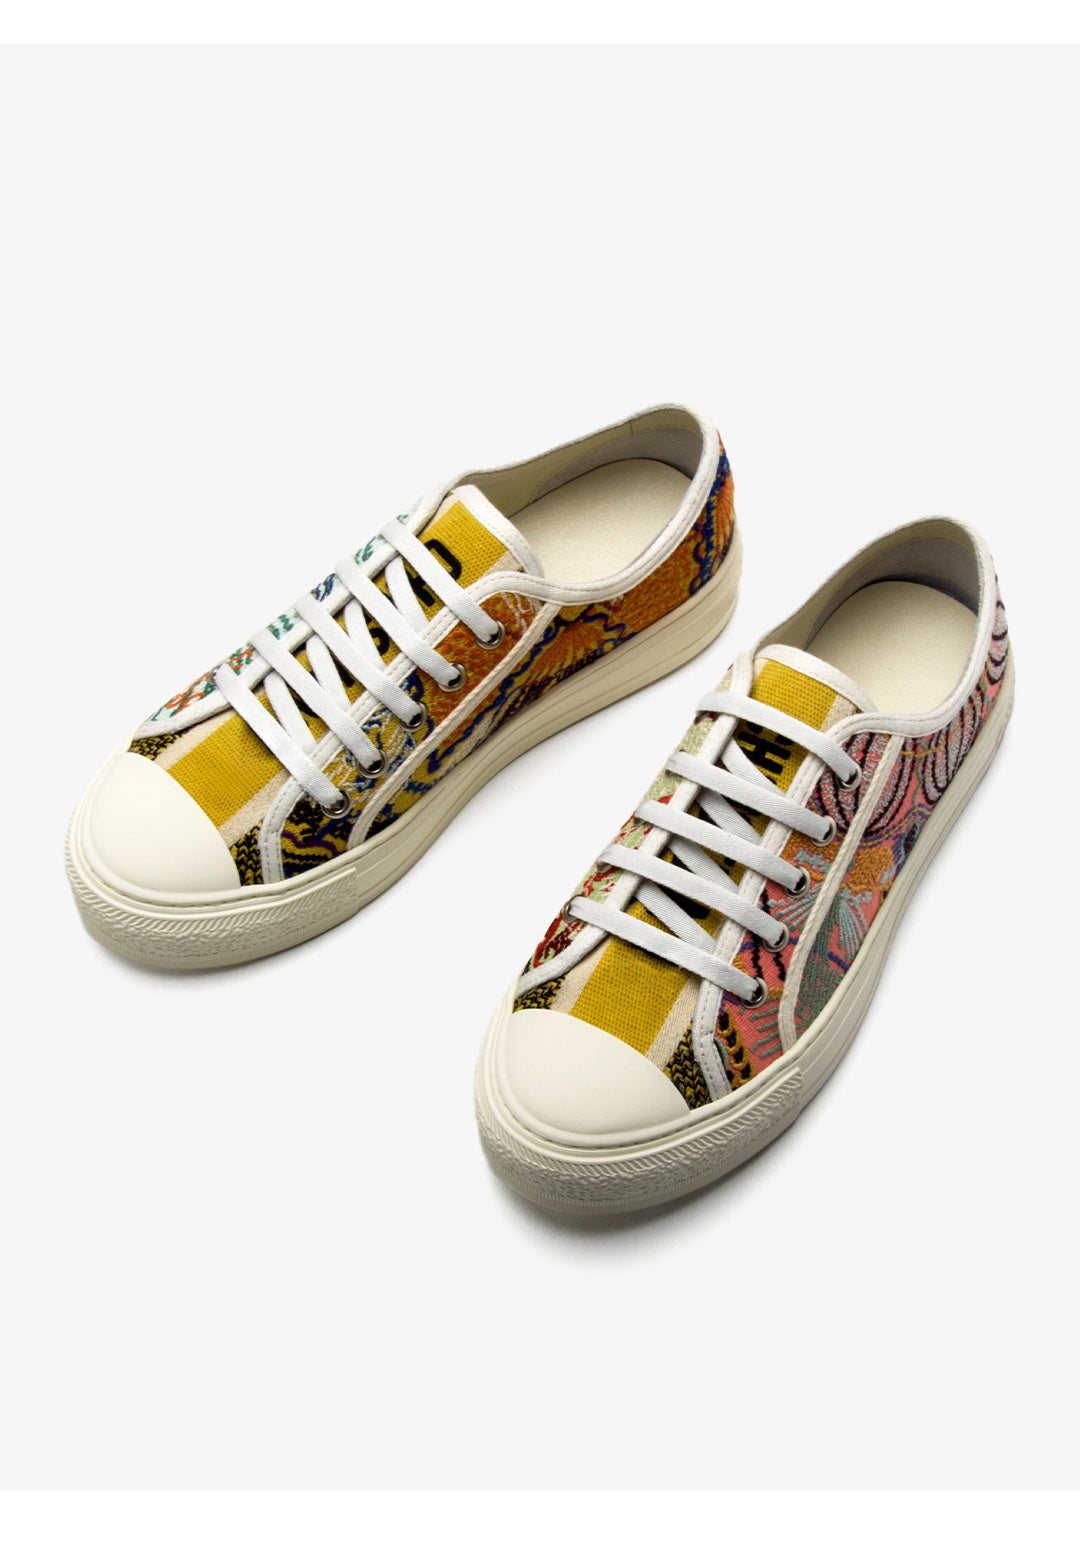 Floras Embroidery Pattern Flat Sneakers